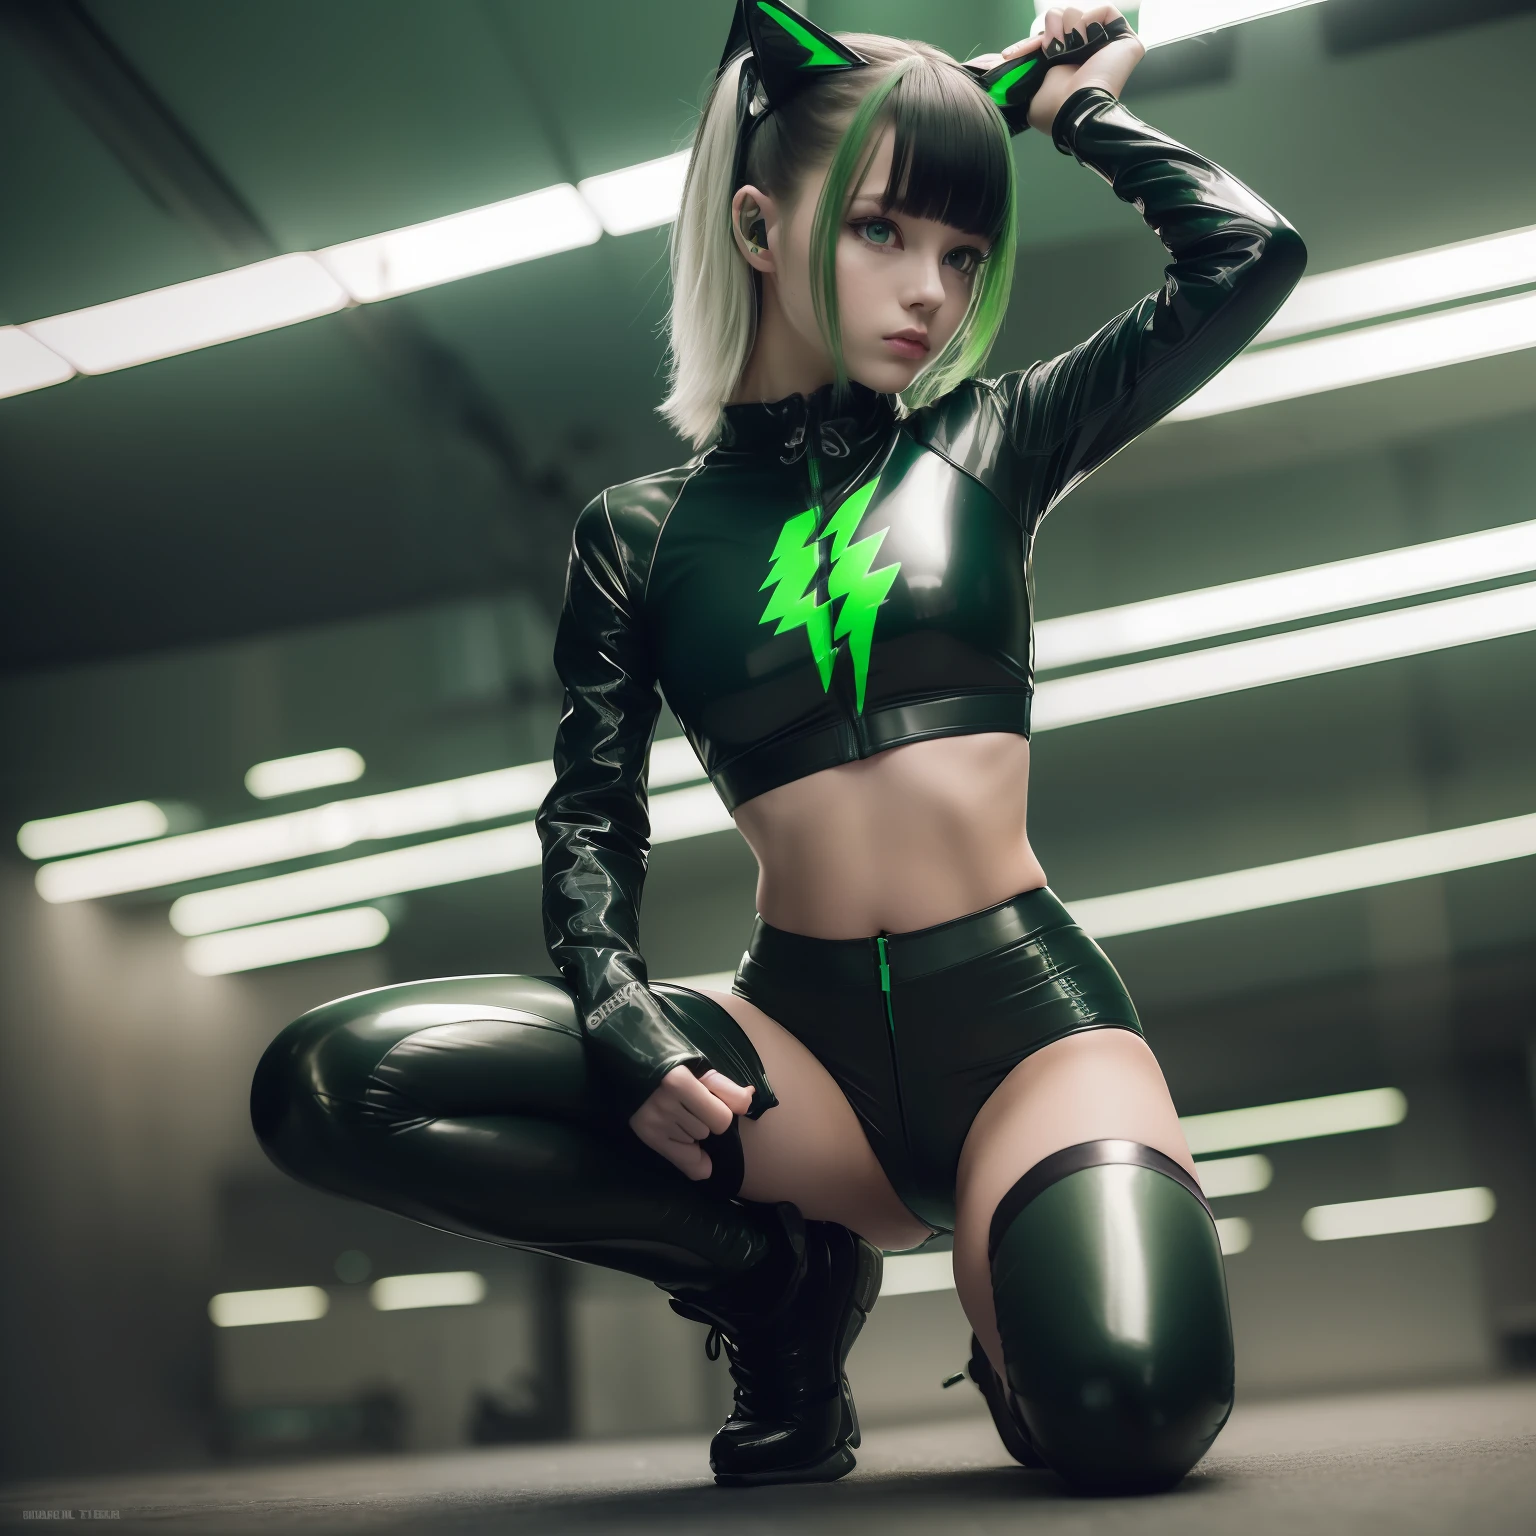 Cyberpunk Edge Runners, 1 Girl, Lucy \ (Cyberpunk \), Green Eyes, Cyber Eye, , Pale Skin,  Figure, (Medium Chest, Wild Girl, Small Head)), Sunlight, Sunlight, (Perfect Body: 1,1), (Young), (Short Wavy Hair: 1,2), ((Green and Black Two-Tone Hair)), (Hair with Bangs)), Collar, Full Length, Crowded Street Black latex panties, (wearing tight cropped ((green lightning pattern, black latex sports bra), (black latex panties)), (highly detailed CG 8k wallpaper), (very delicate and beautiful), (masterpiece), (best quality: 1.0), (super high definition: 1.0), gorgeous lighting, perfect flash, realistic shadows, [high resolution], detail skin, Very detailed, pale skin, barefoot,(green cat ears)